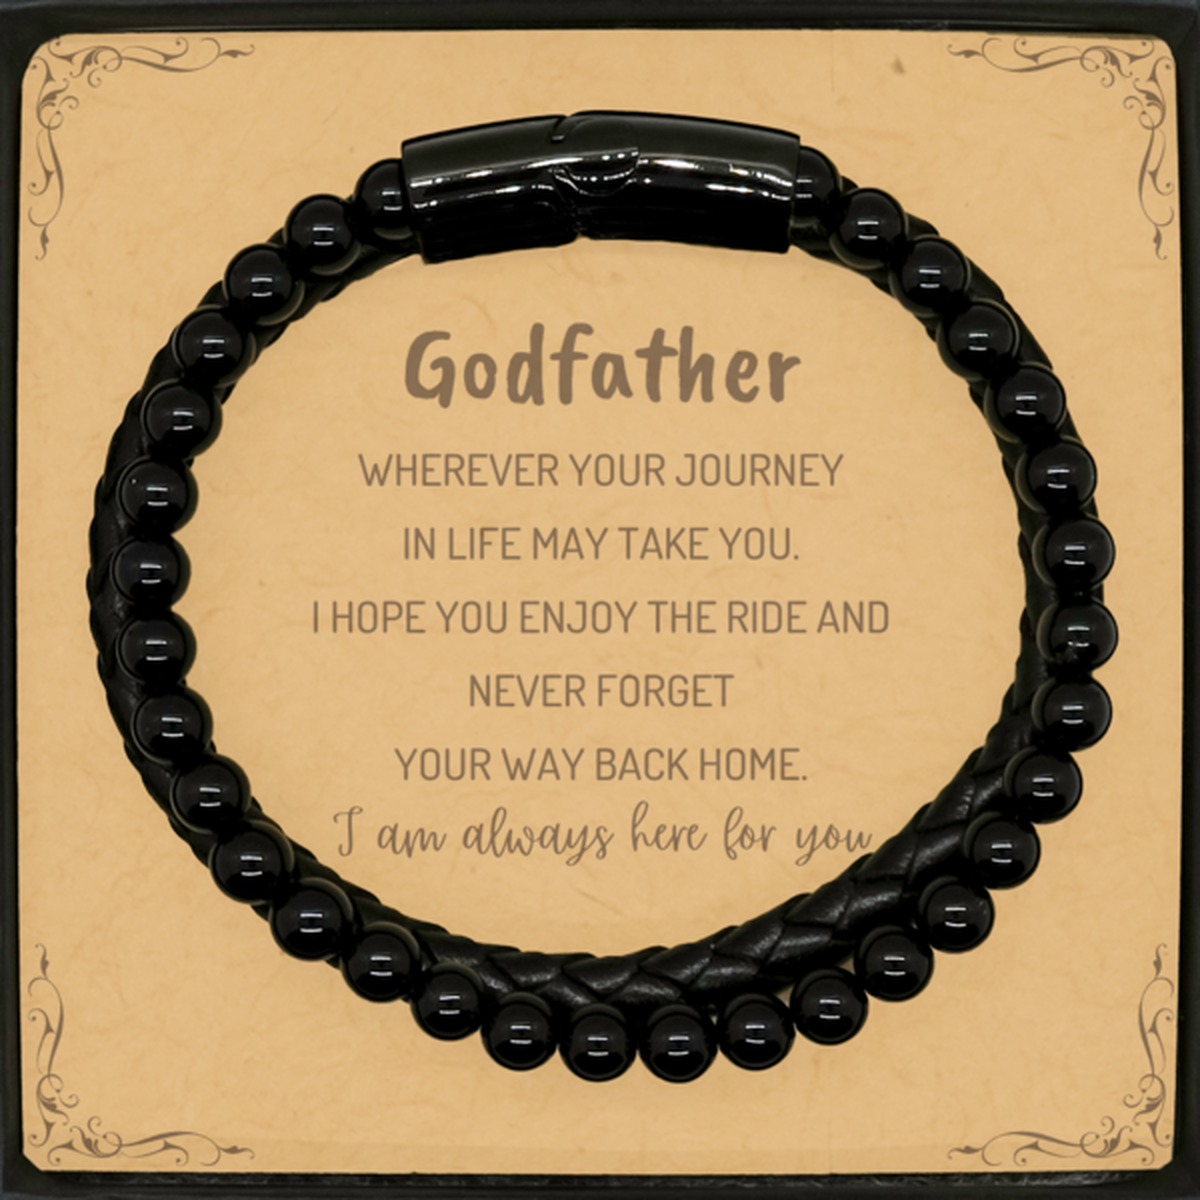 Godfather wherever your journey in life may take you, I am always here for you Godfather Stone Leather Bracelets, Awesome Christmas Gifts For Godfather Message Card, Godfather Birthday Gifts for Men Women Family Loved One